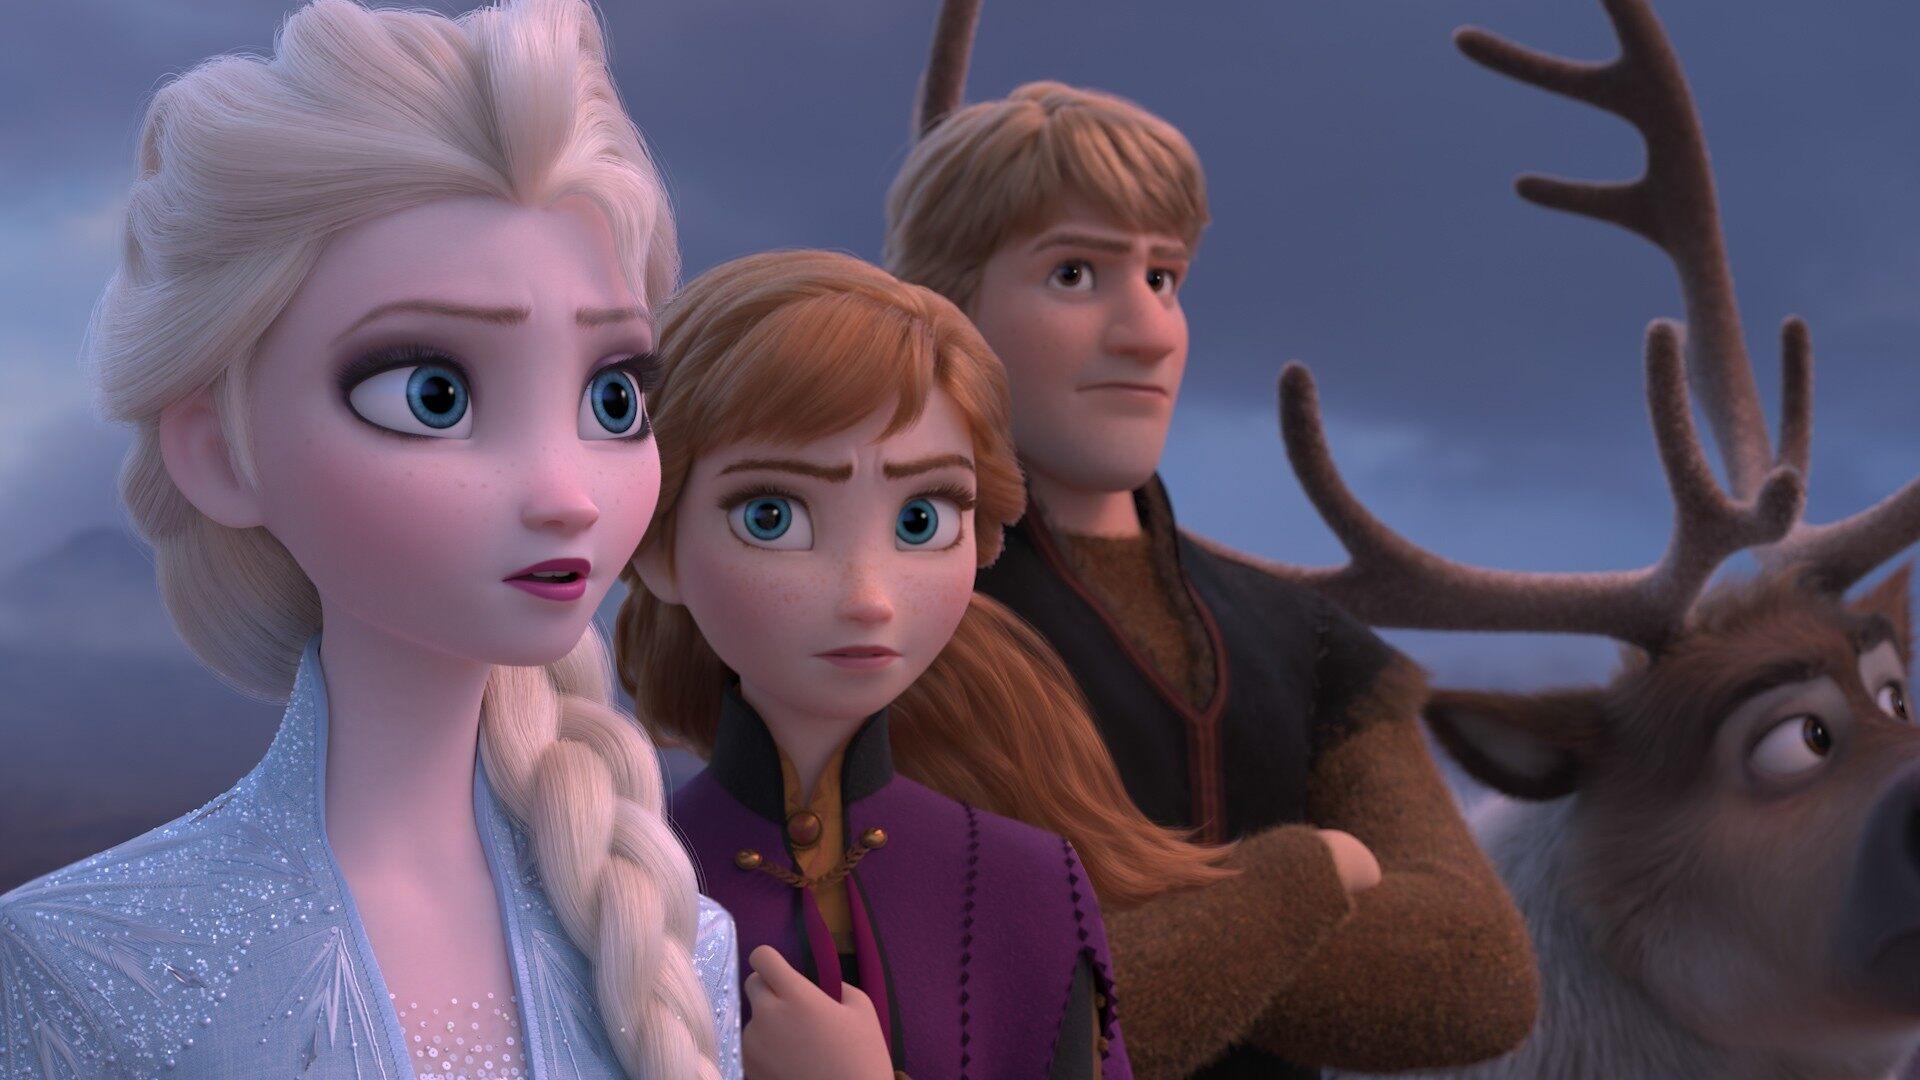 Frozen 2' Shows Return of Elsa and Anna